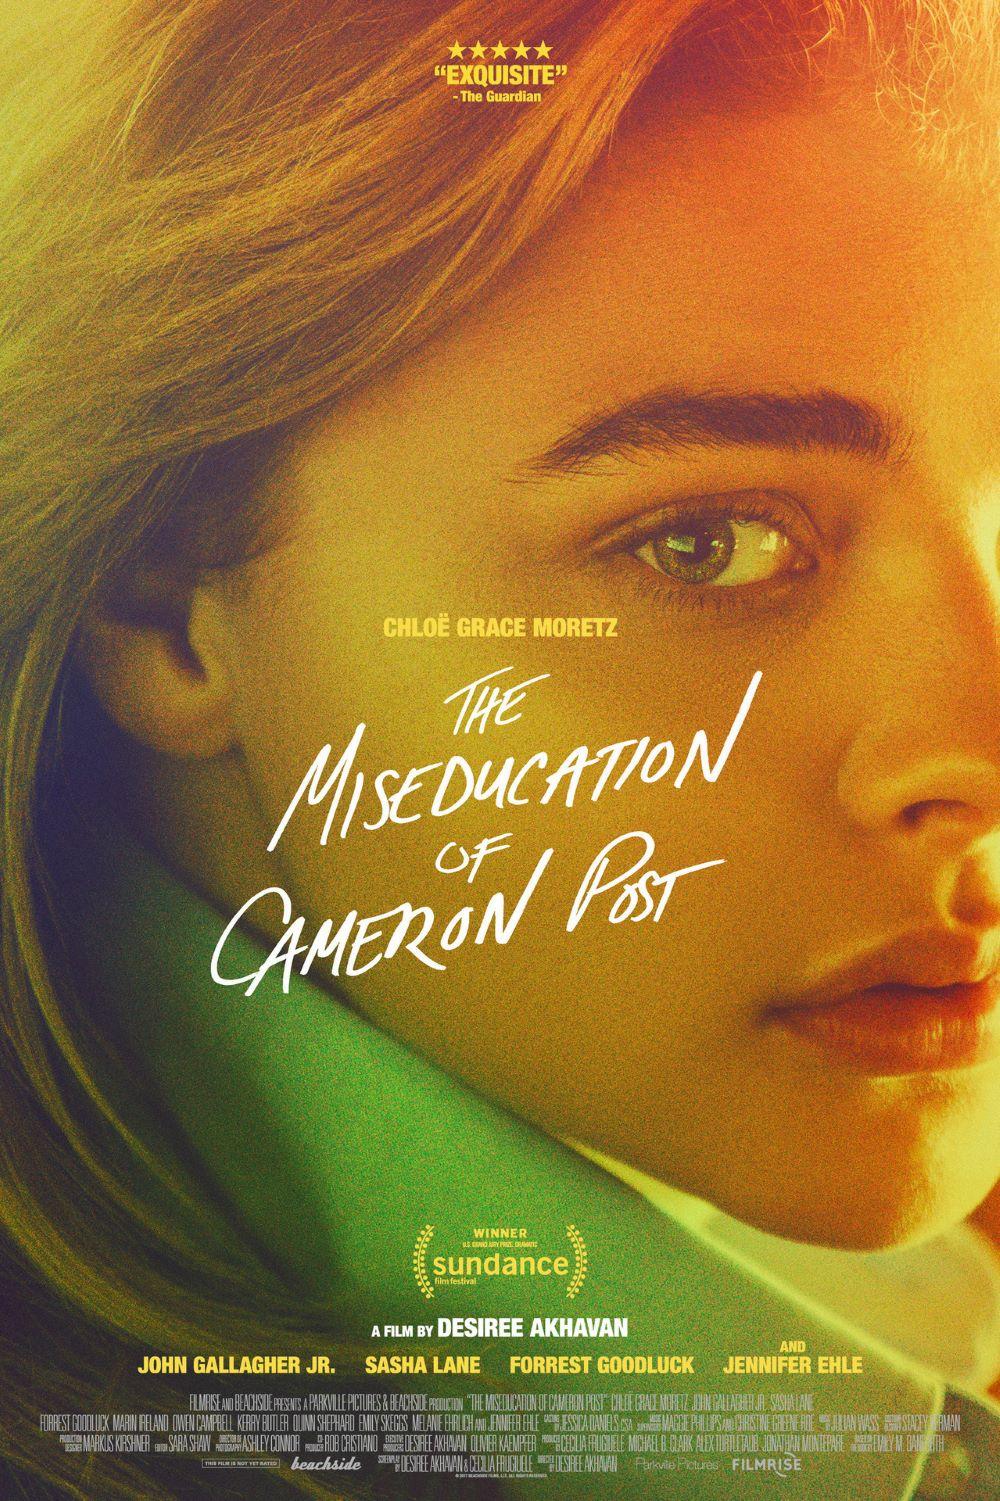 2.THE MISEDUCATION OF CAMERON POST 